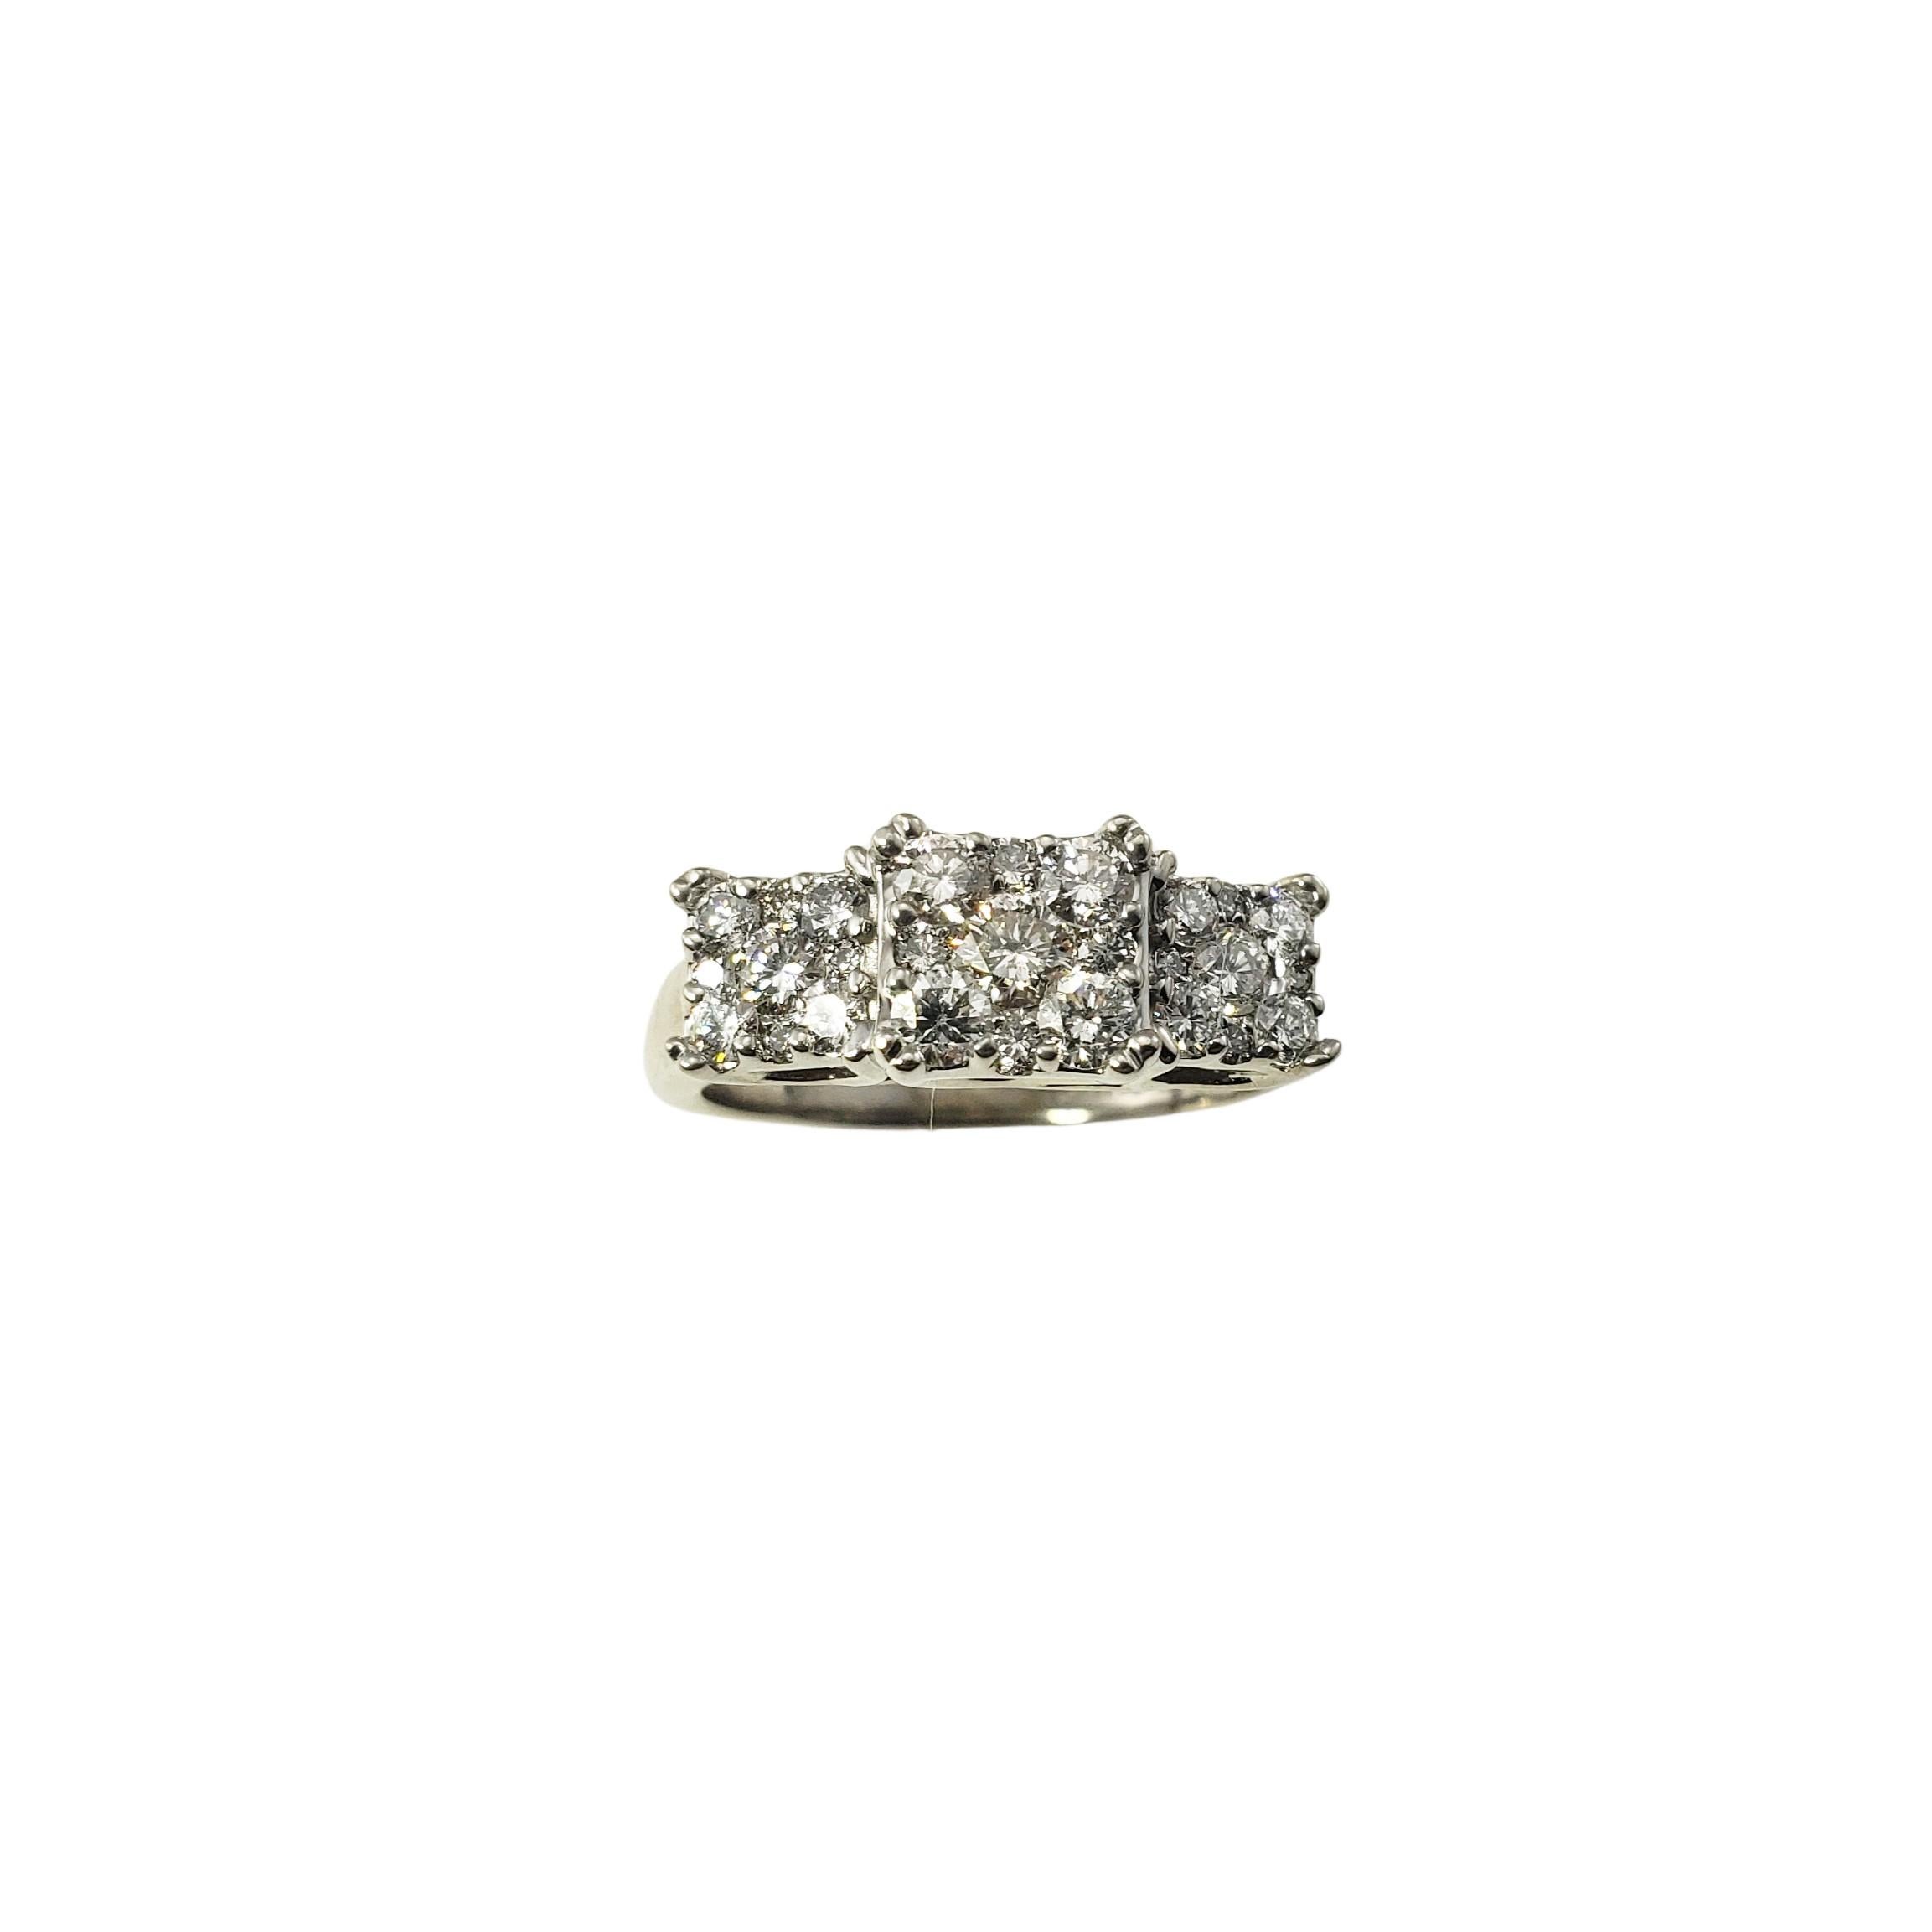 14 Karat White Gold and Diamond Ring Size 7.25-

This sparkling ring features 27 round brilliant cut diamonds set in classic 14K white gold.  Width:  7 mm.  Shank:  2 mm.

Approximate total diamond weight:  .42 ct.

Diamond color: H-I

Diamond